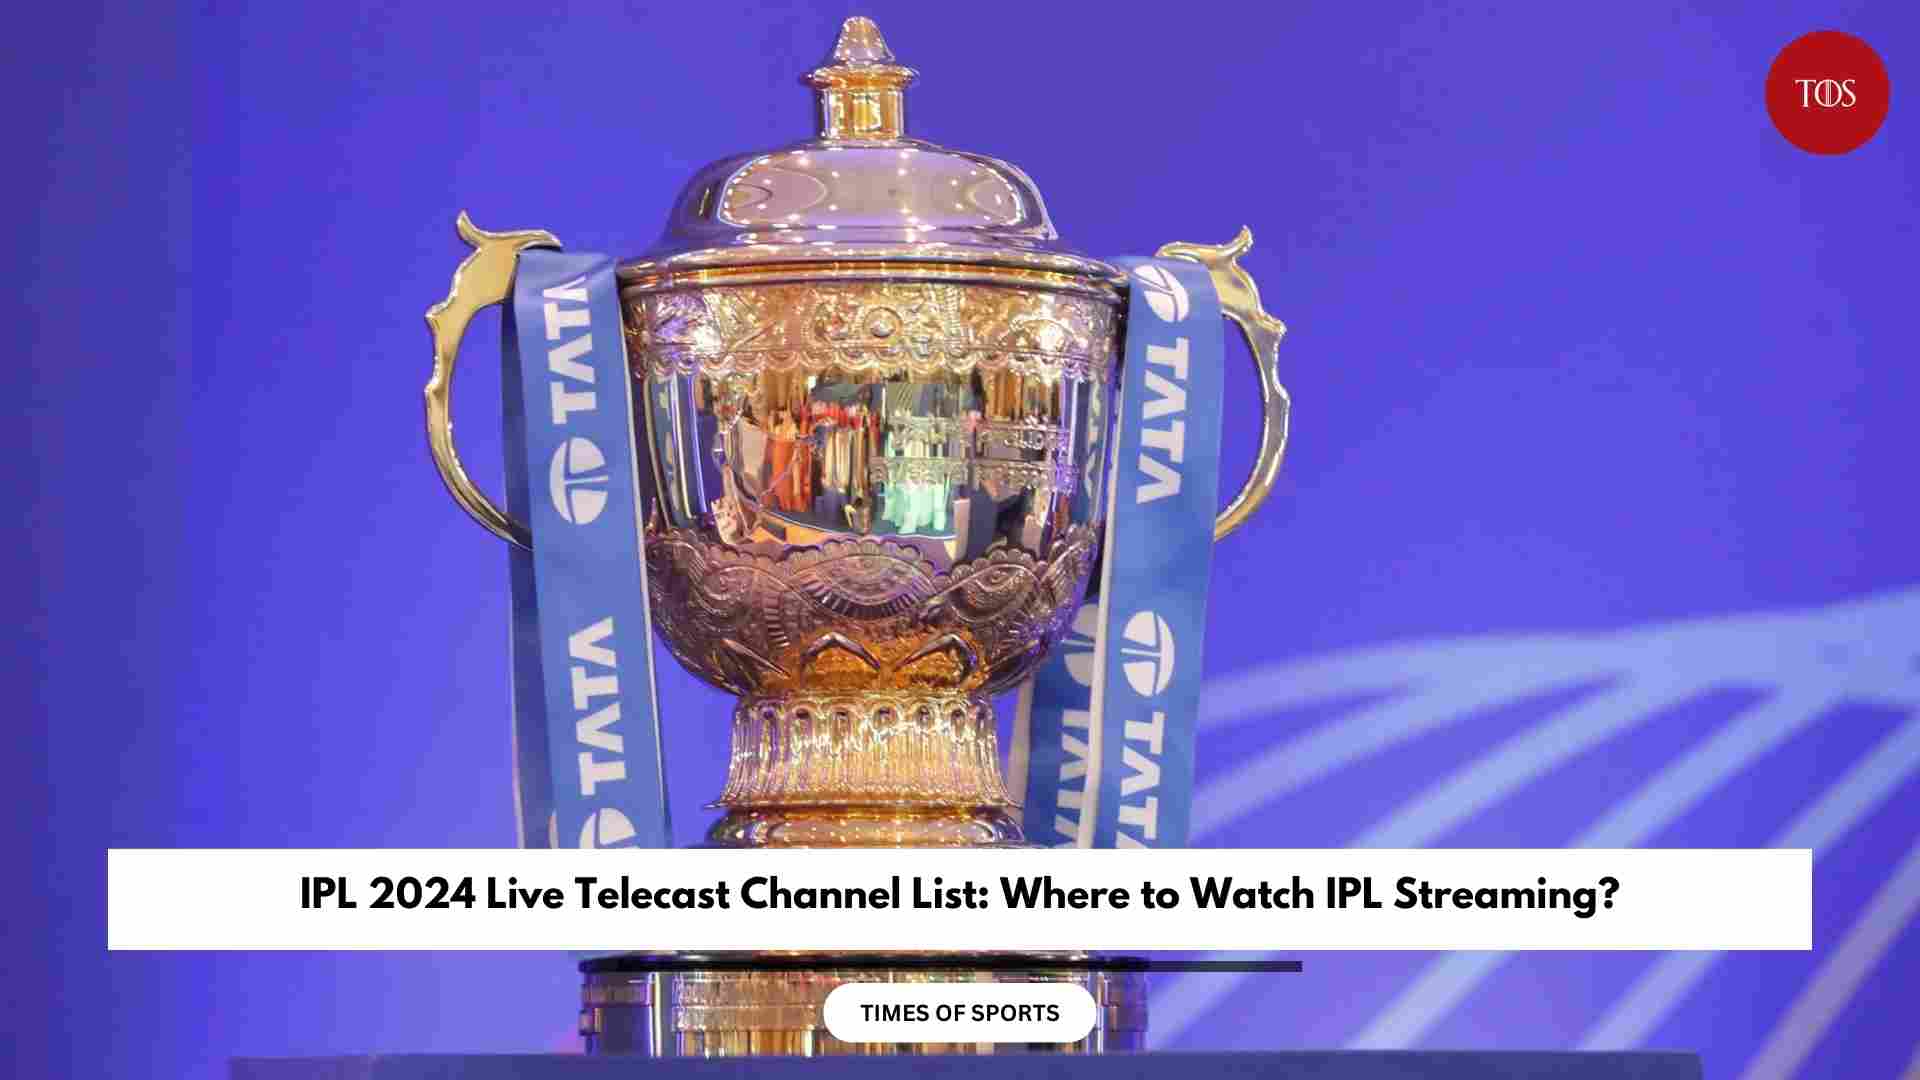 IPL 2024 Live Telecast Channel List Where to Watch IPL?